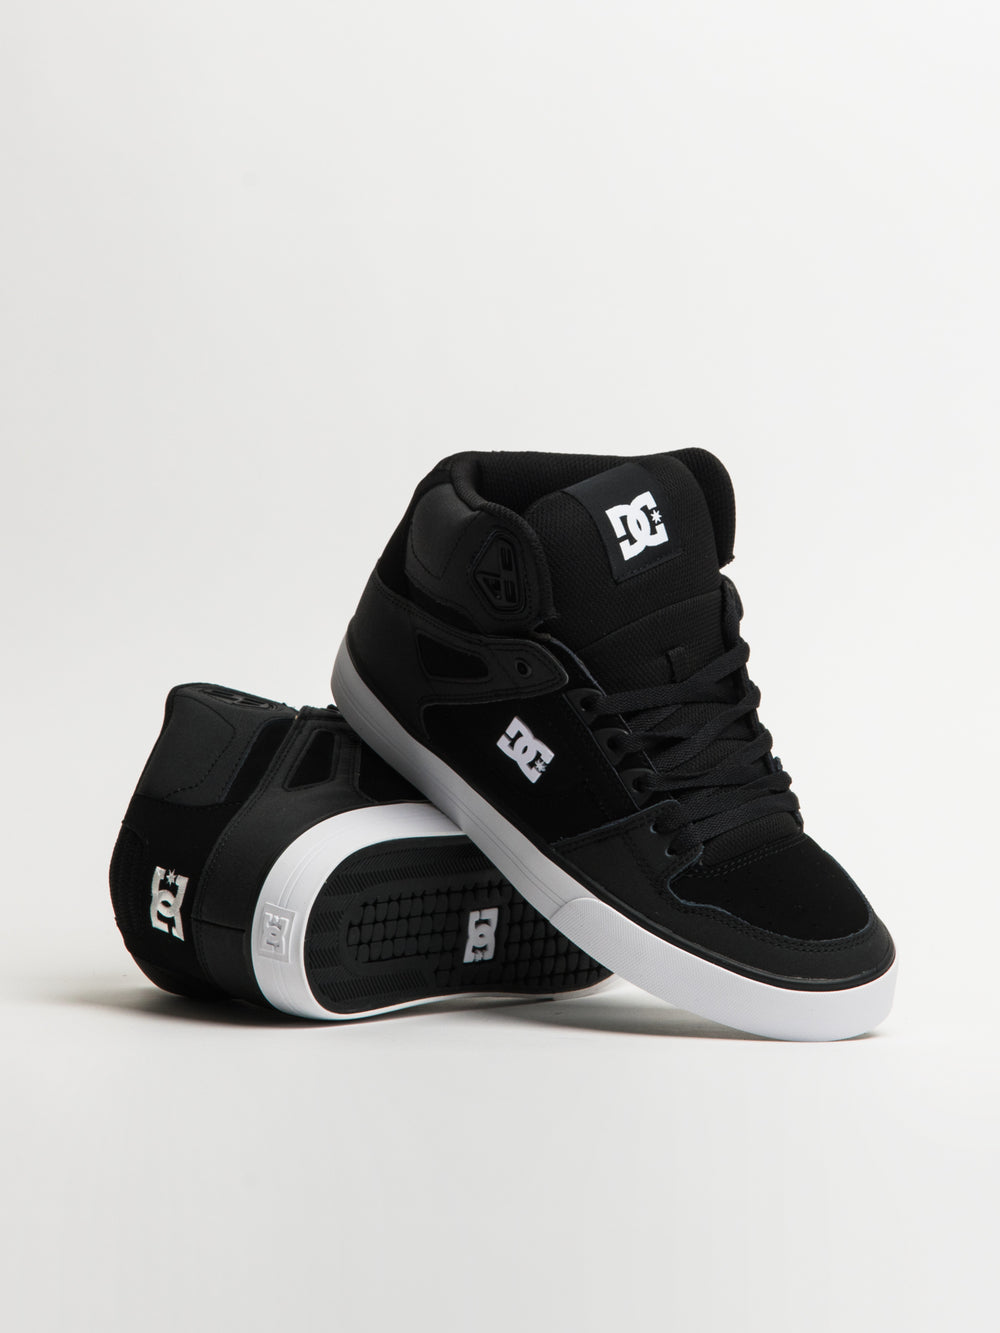 MENS DC SHOES PURE HIGH TOP WC SNEAKER